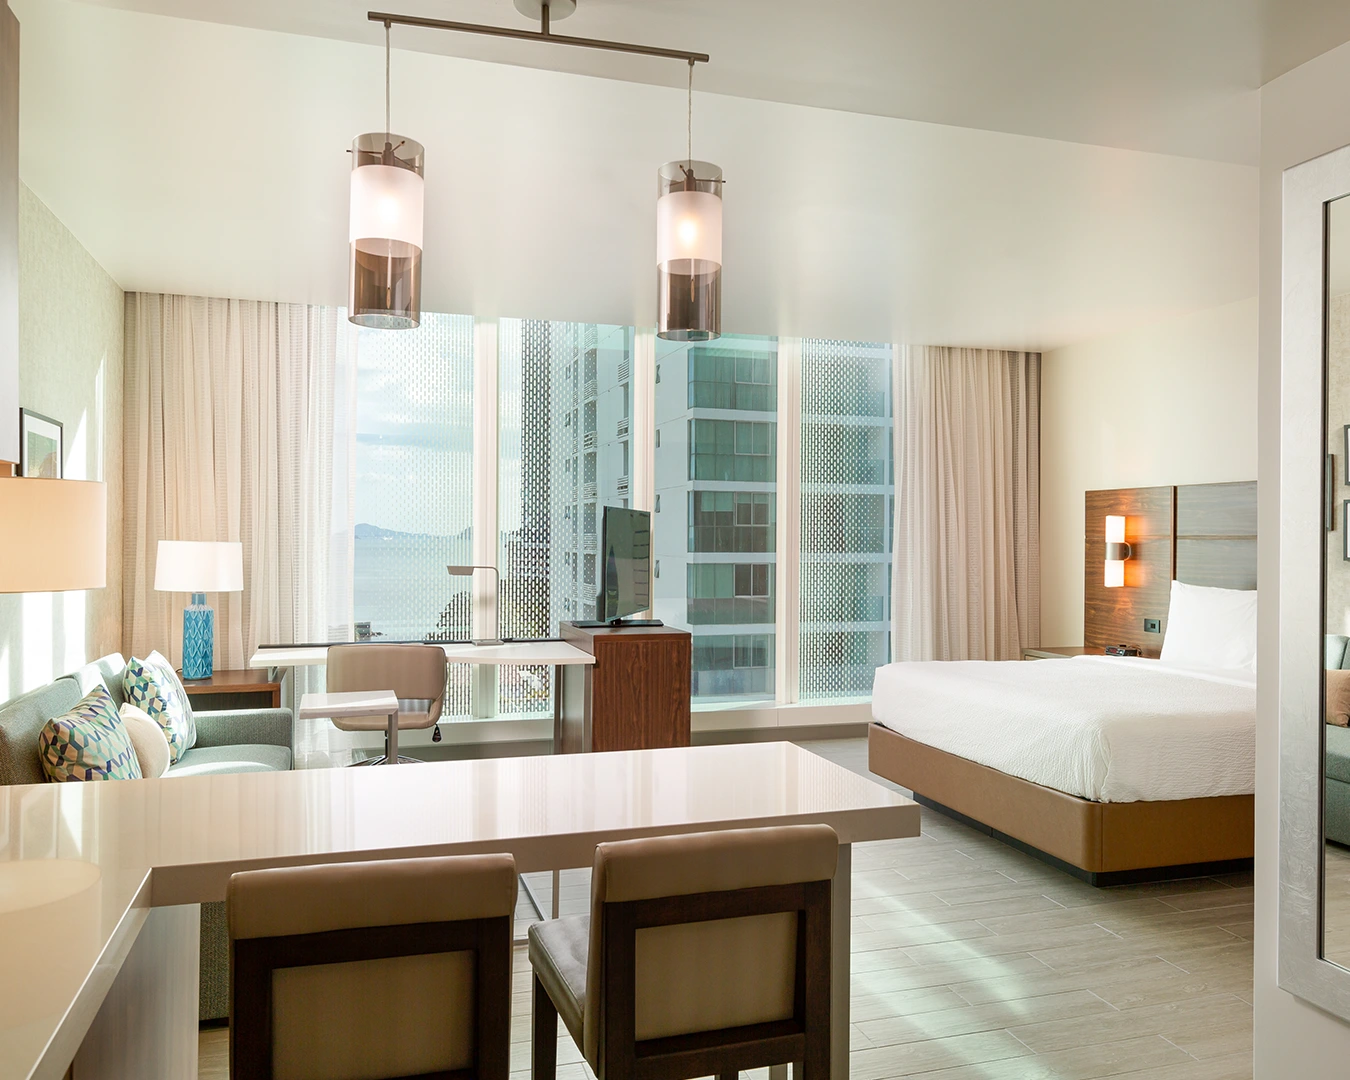 Comfort and functionality at the residence inn hotel | Pacific Center Panama